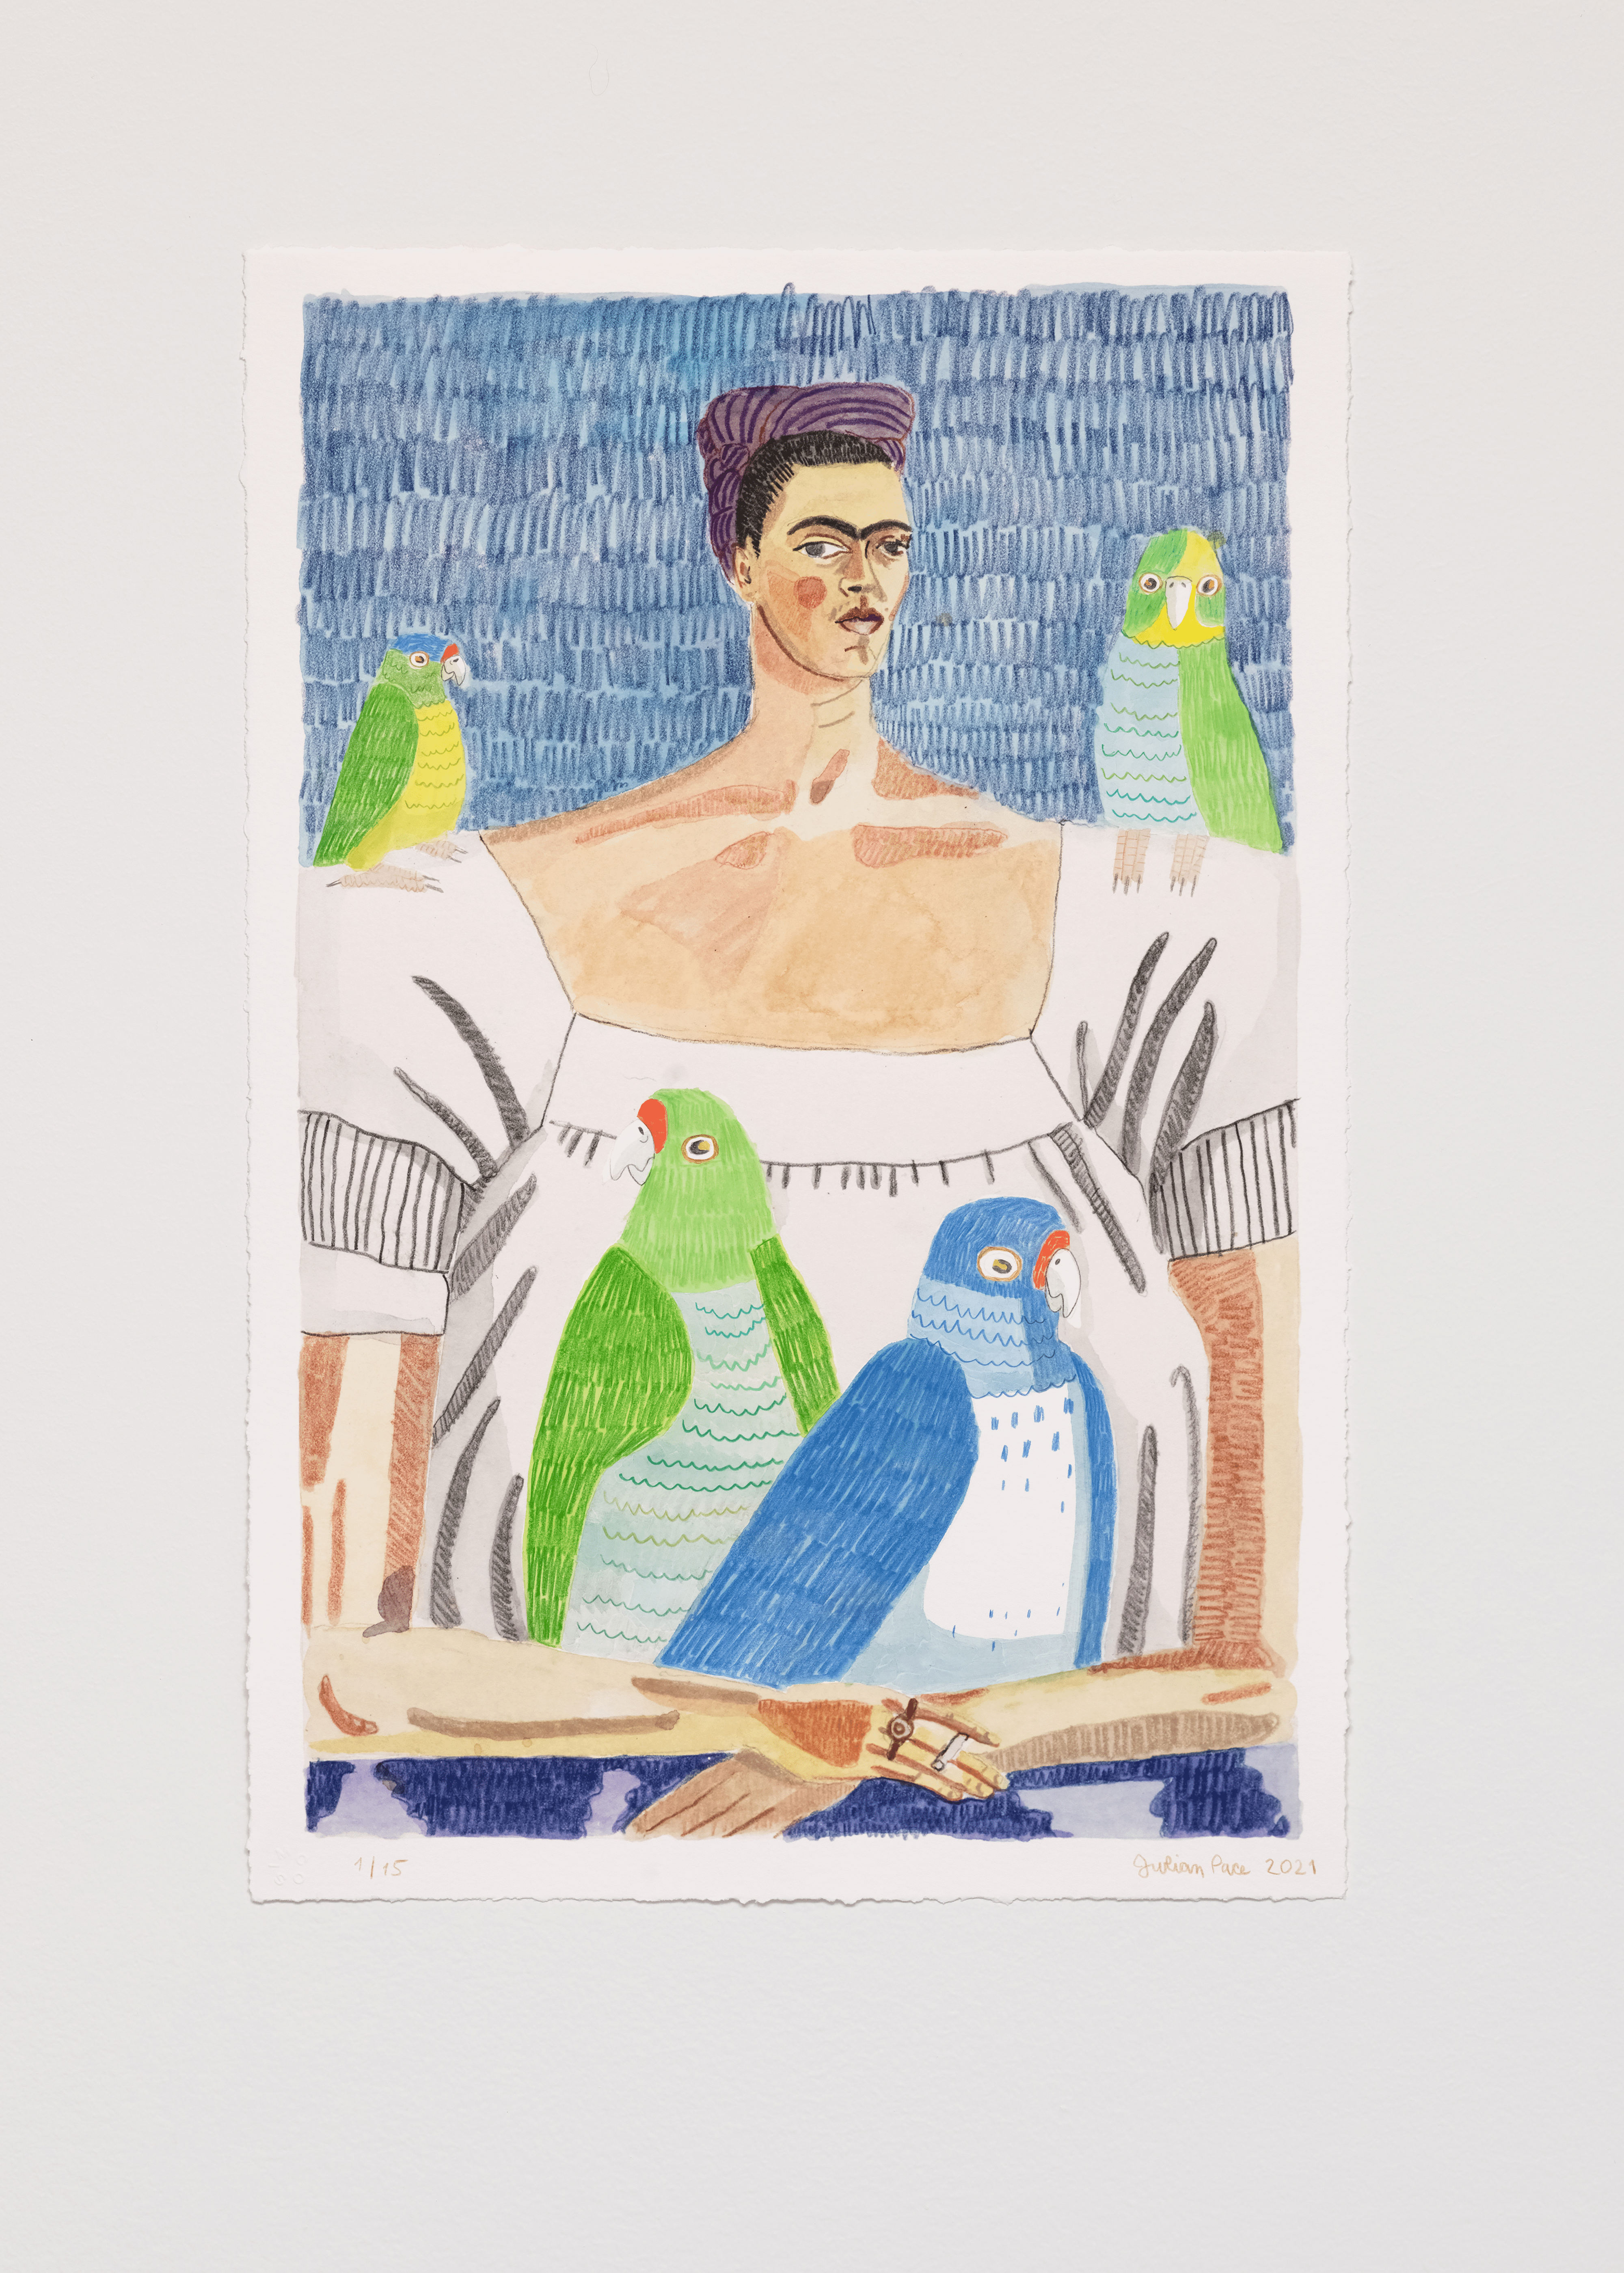 Julian Pace - Frida and Parrots #1